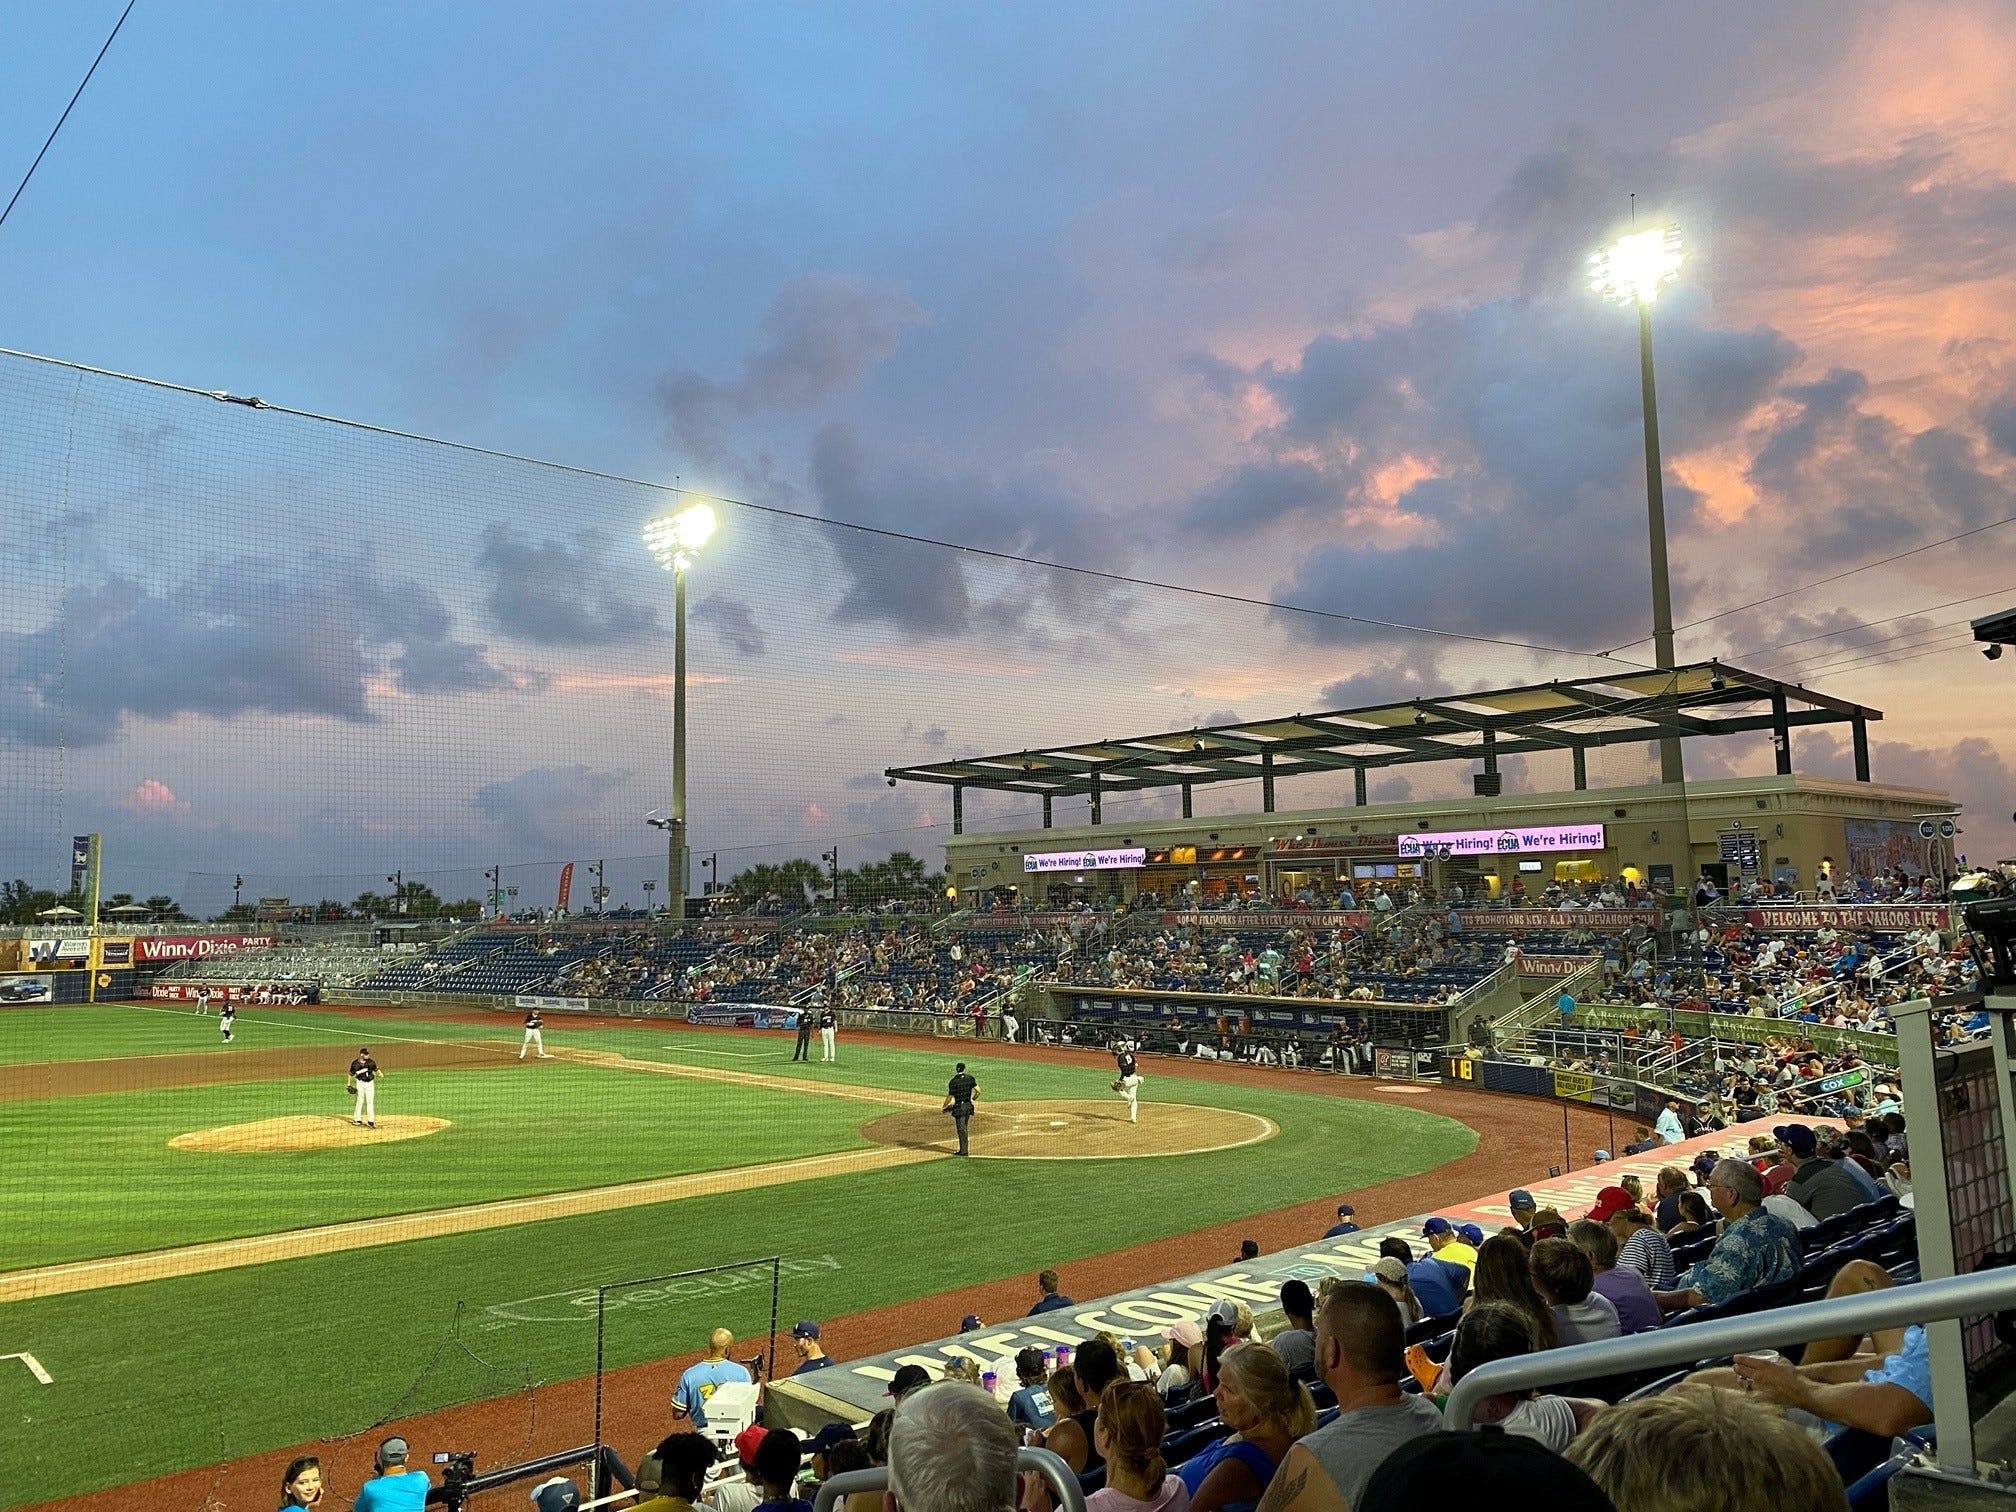 Minor League Baseball would be a win for Tallahassee |Jay Revell